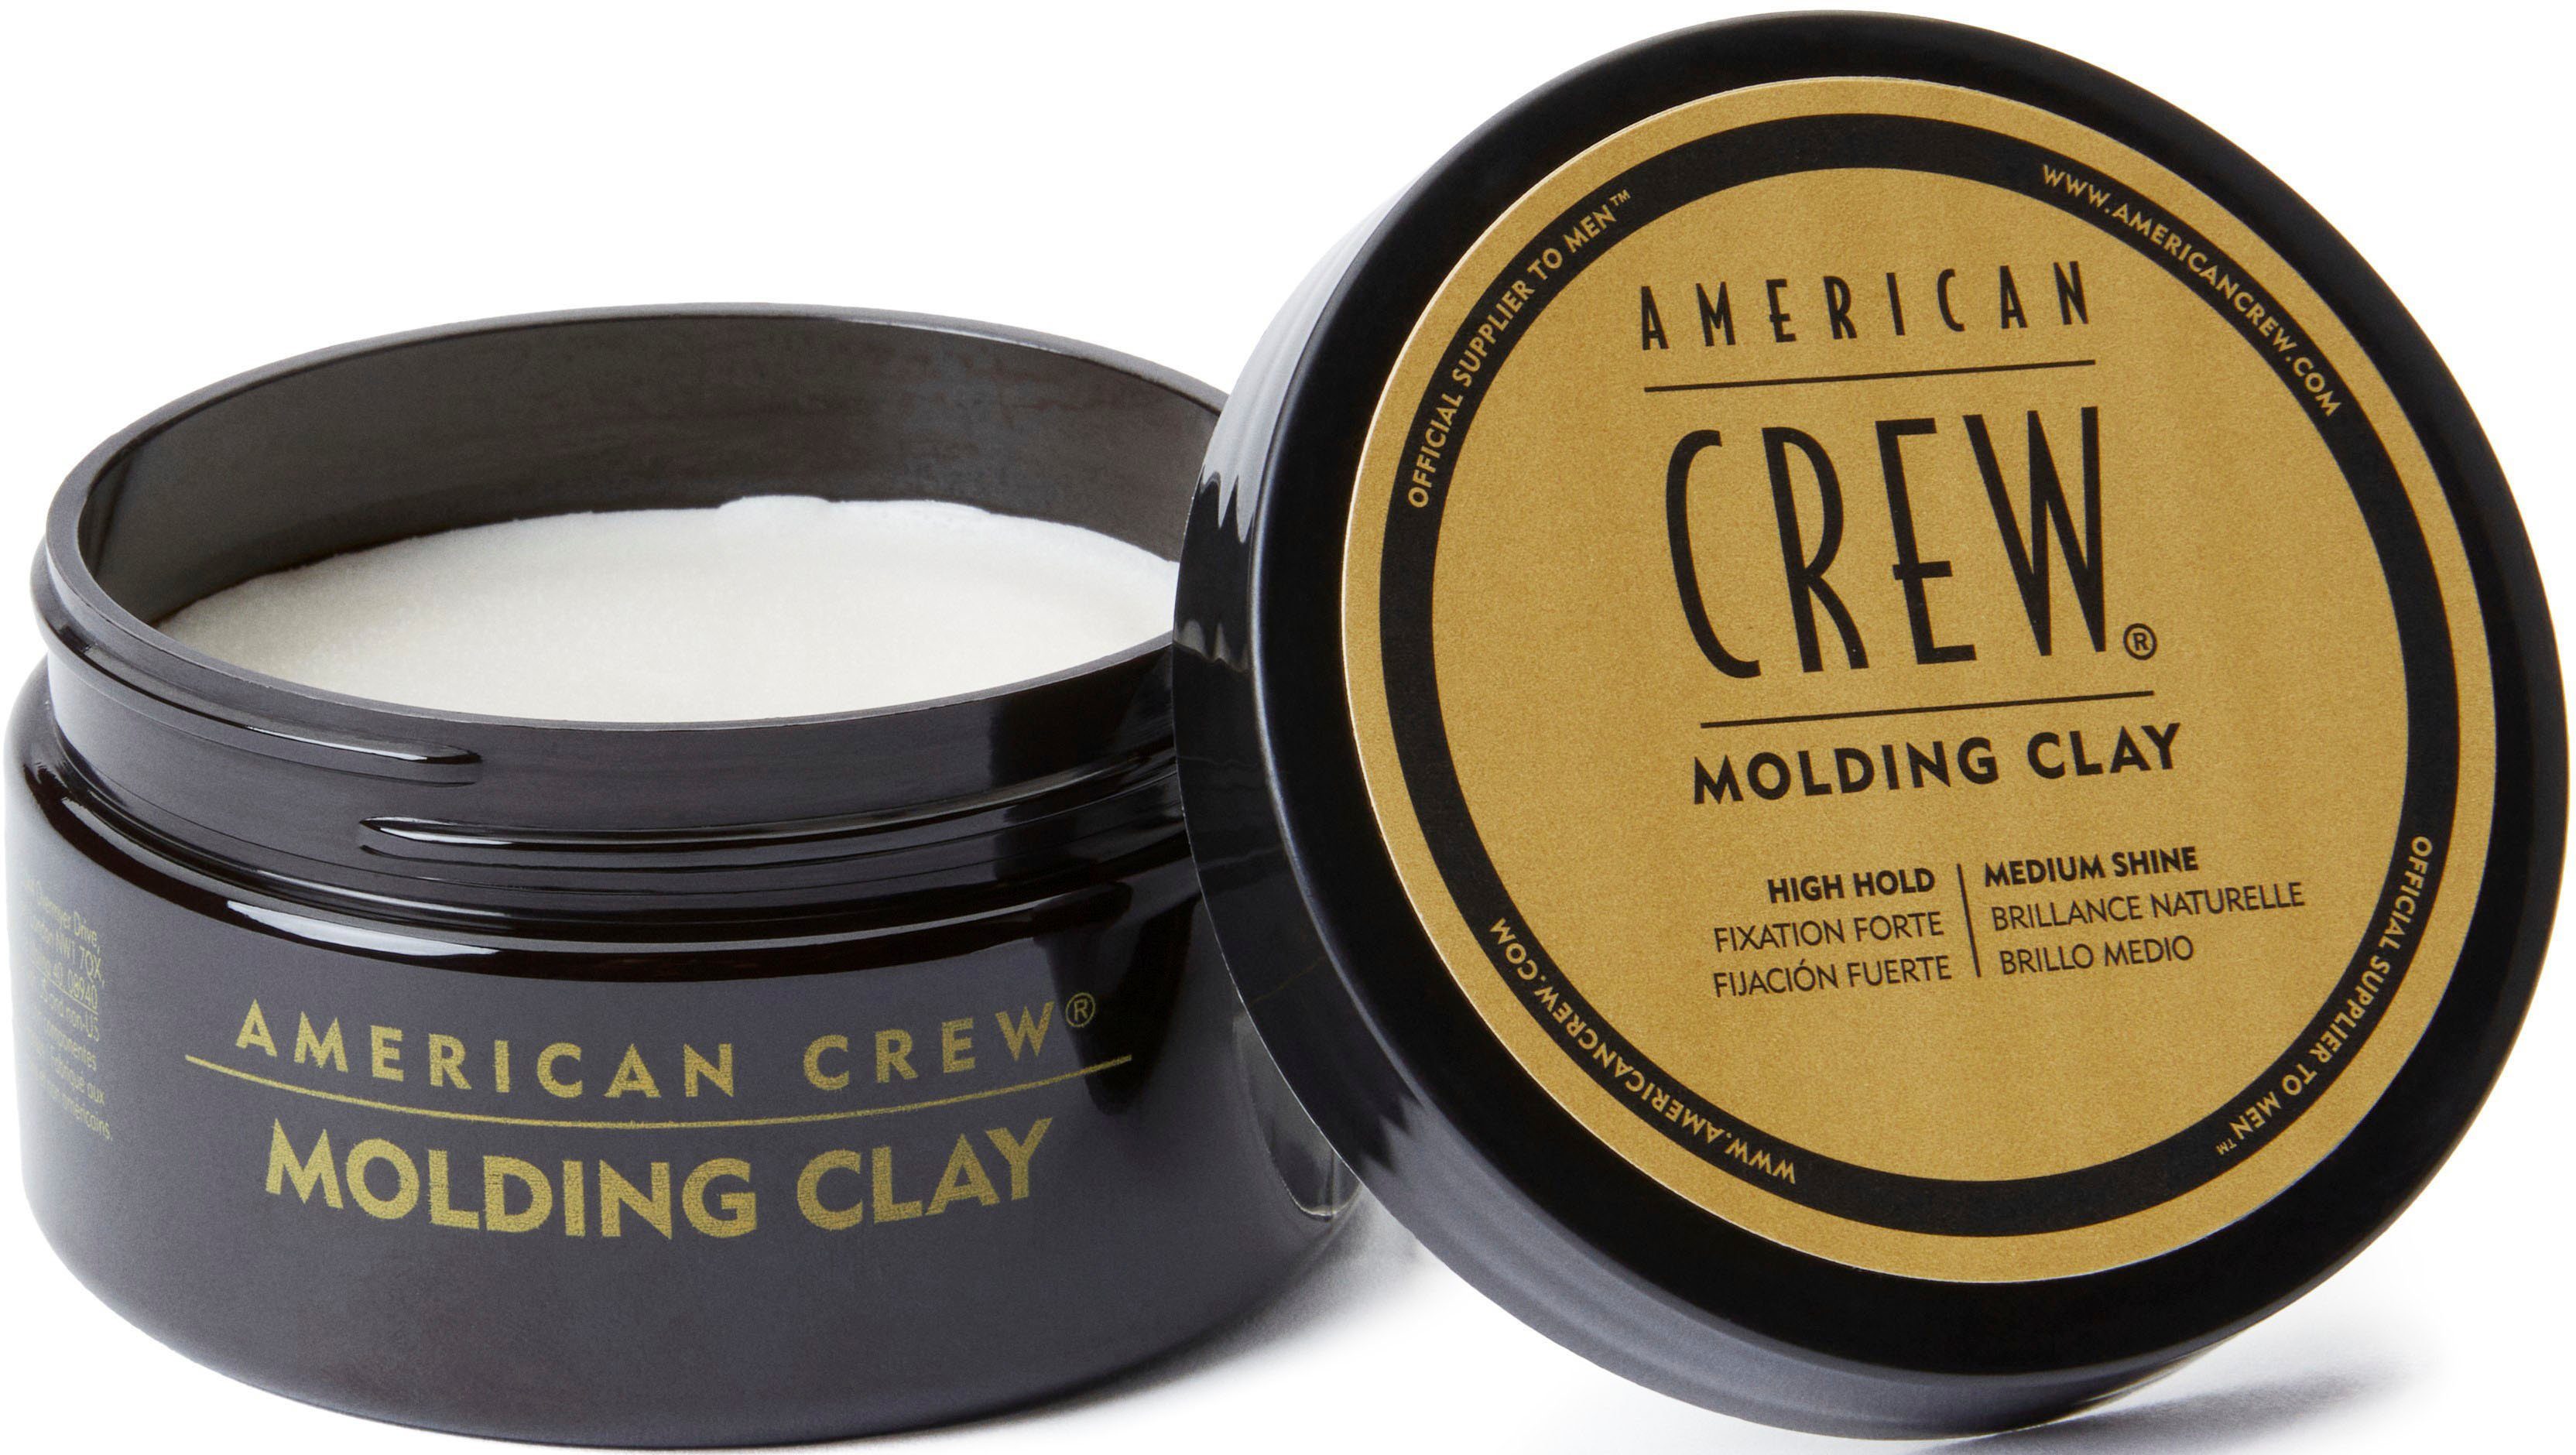 Molding Stylingclay Styling-Creme 85 Cream, Classic Haar-Styling American Forming Crew gr, Clay